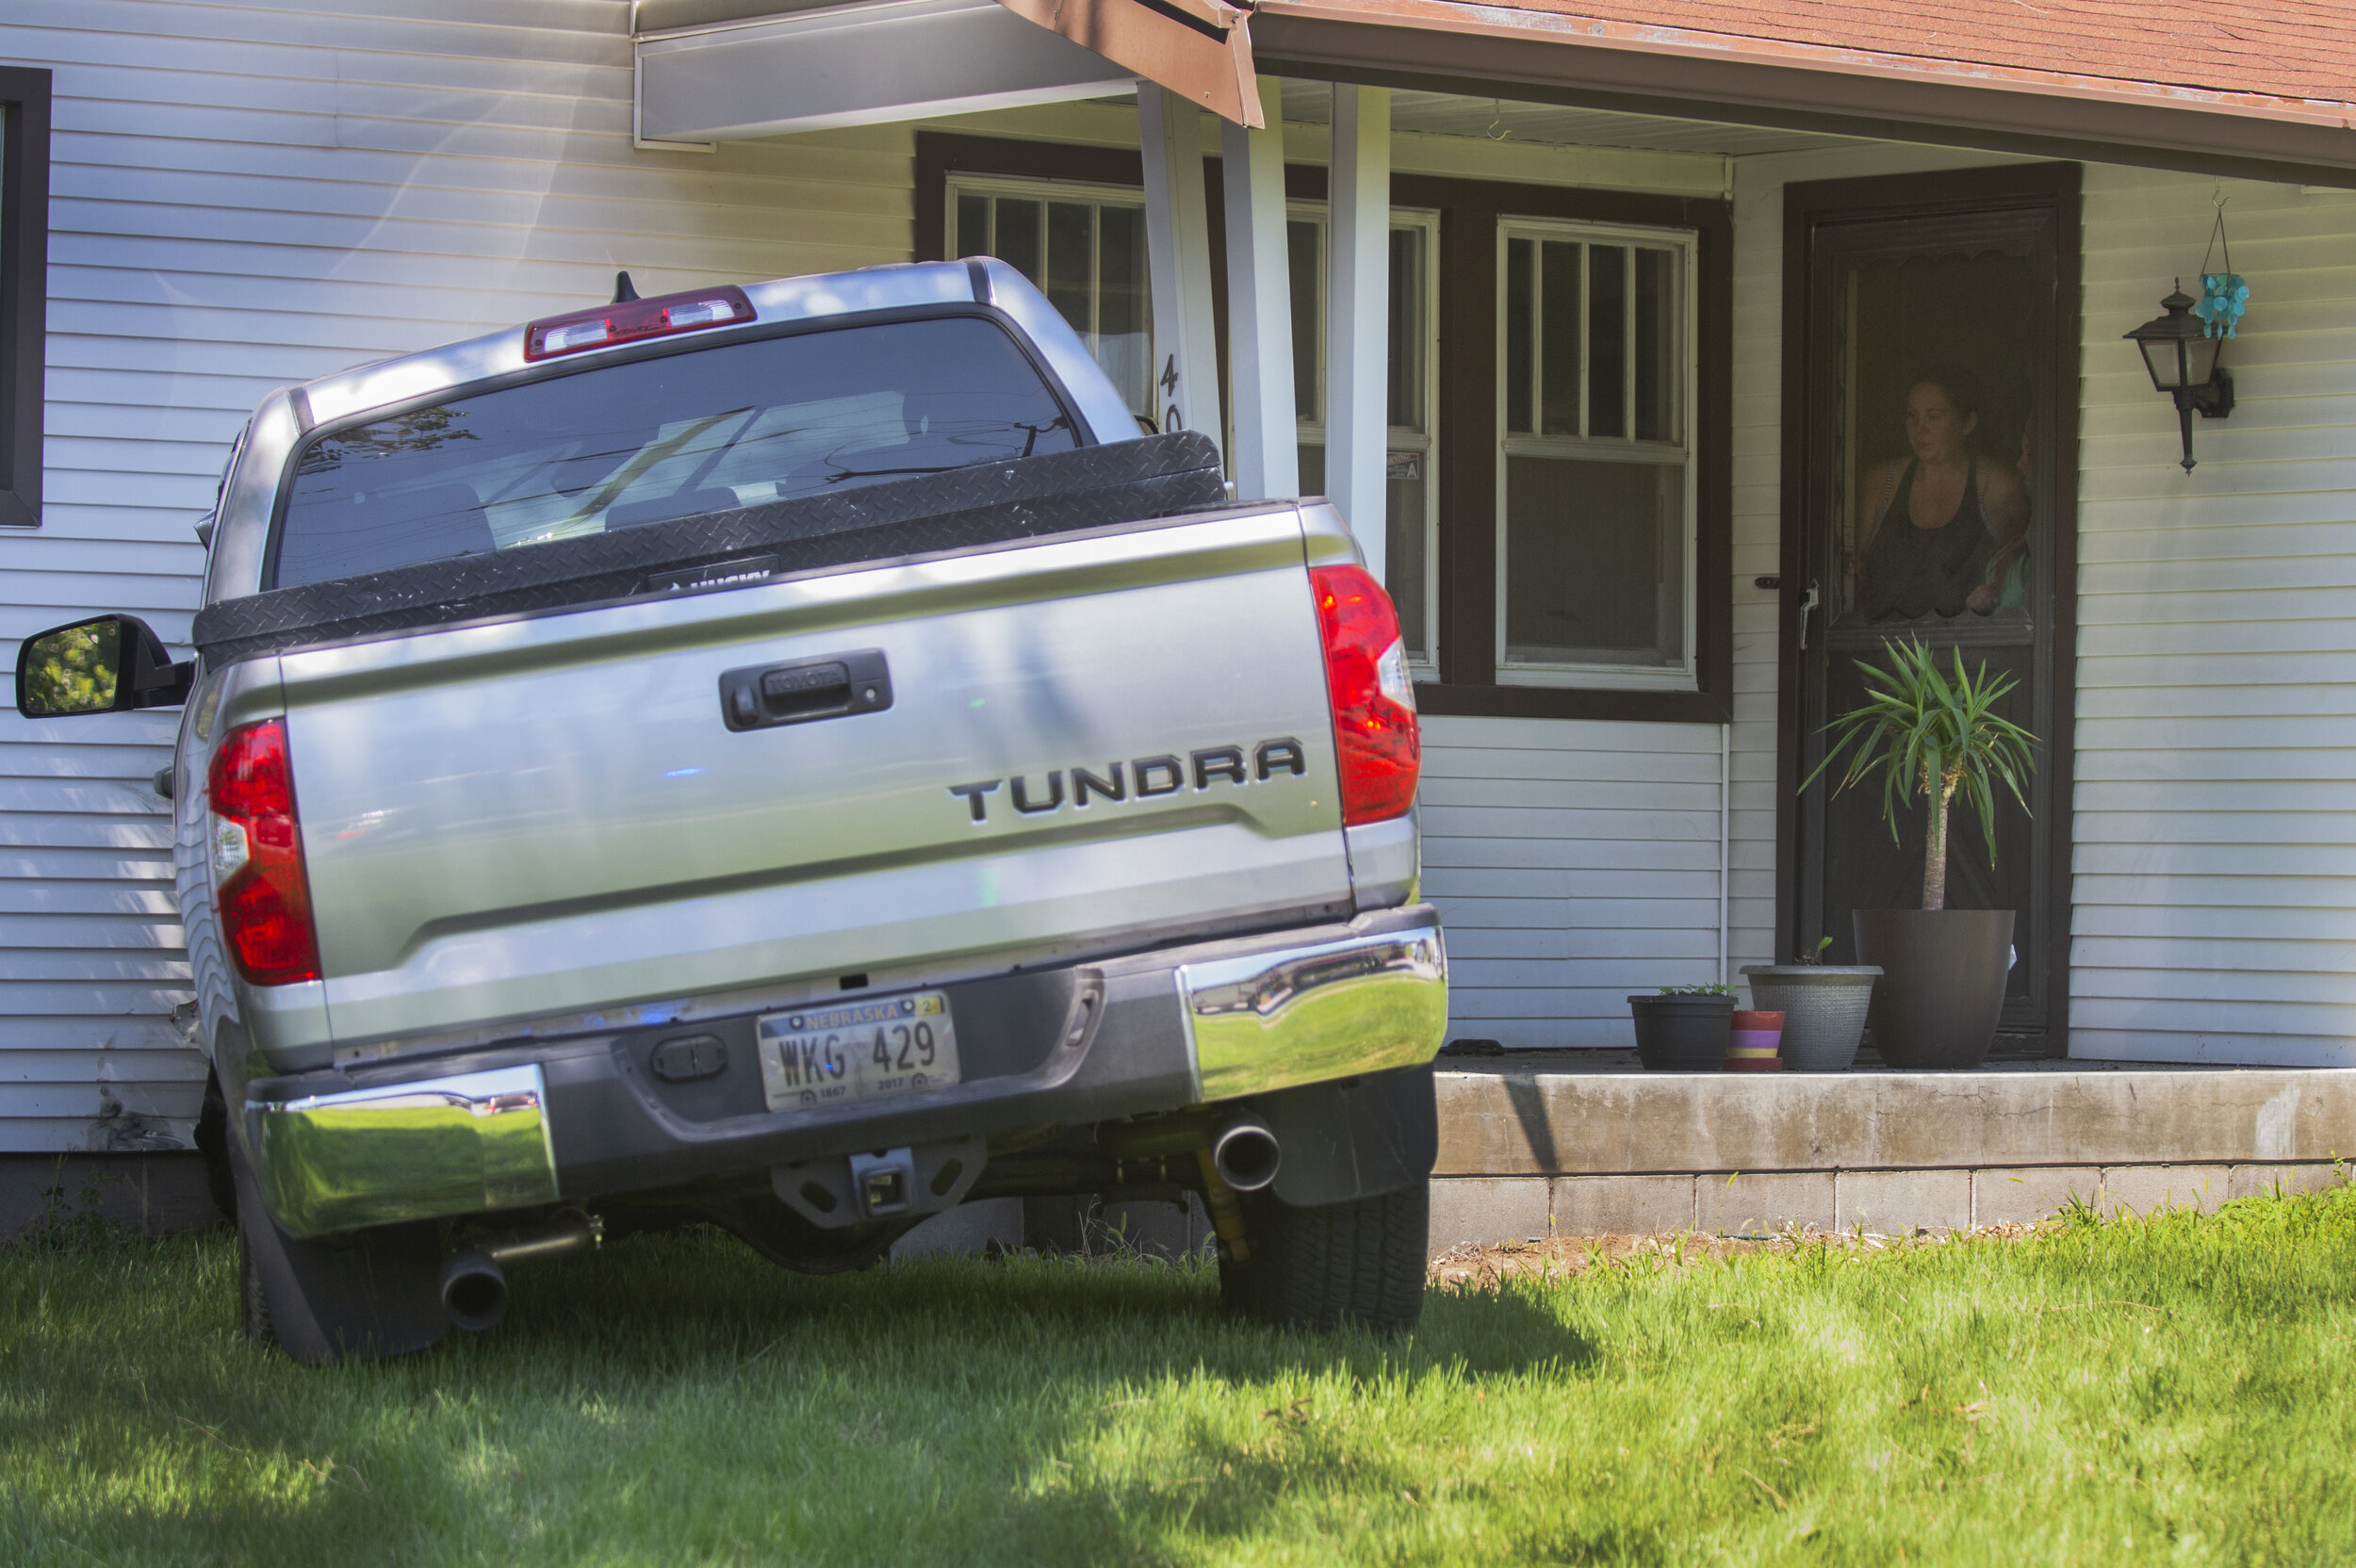  Homeowners peek out from their front door at a Toyota Tundra that careened into the side of their home after a two-vehicle collision at the intersection of 56th and R St. on Friday, July 10, 2020, in Lincoln, Nebraska. One person was taken to the ho